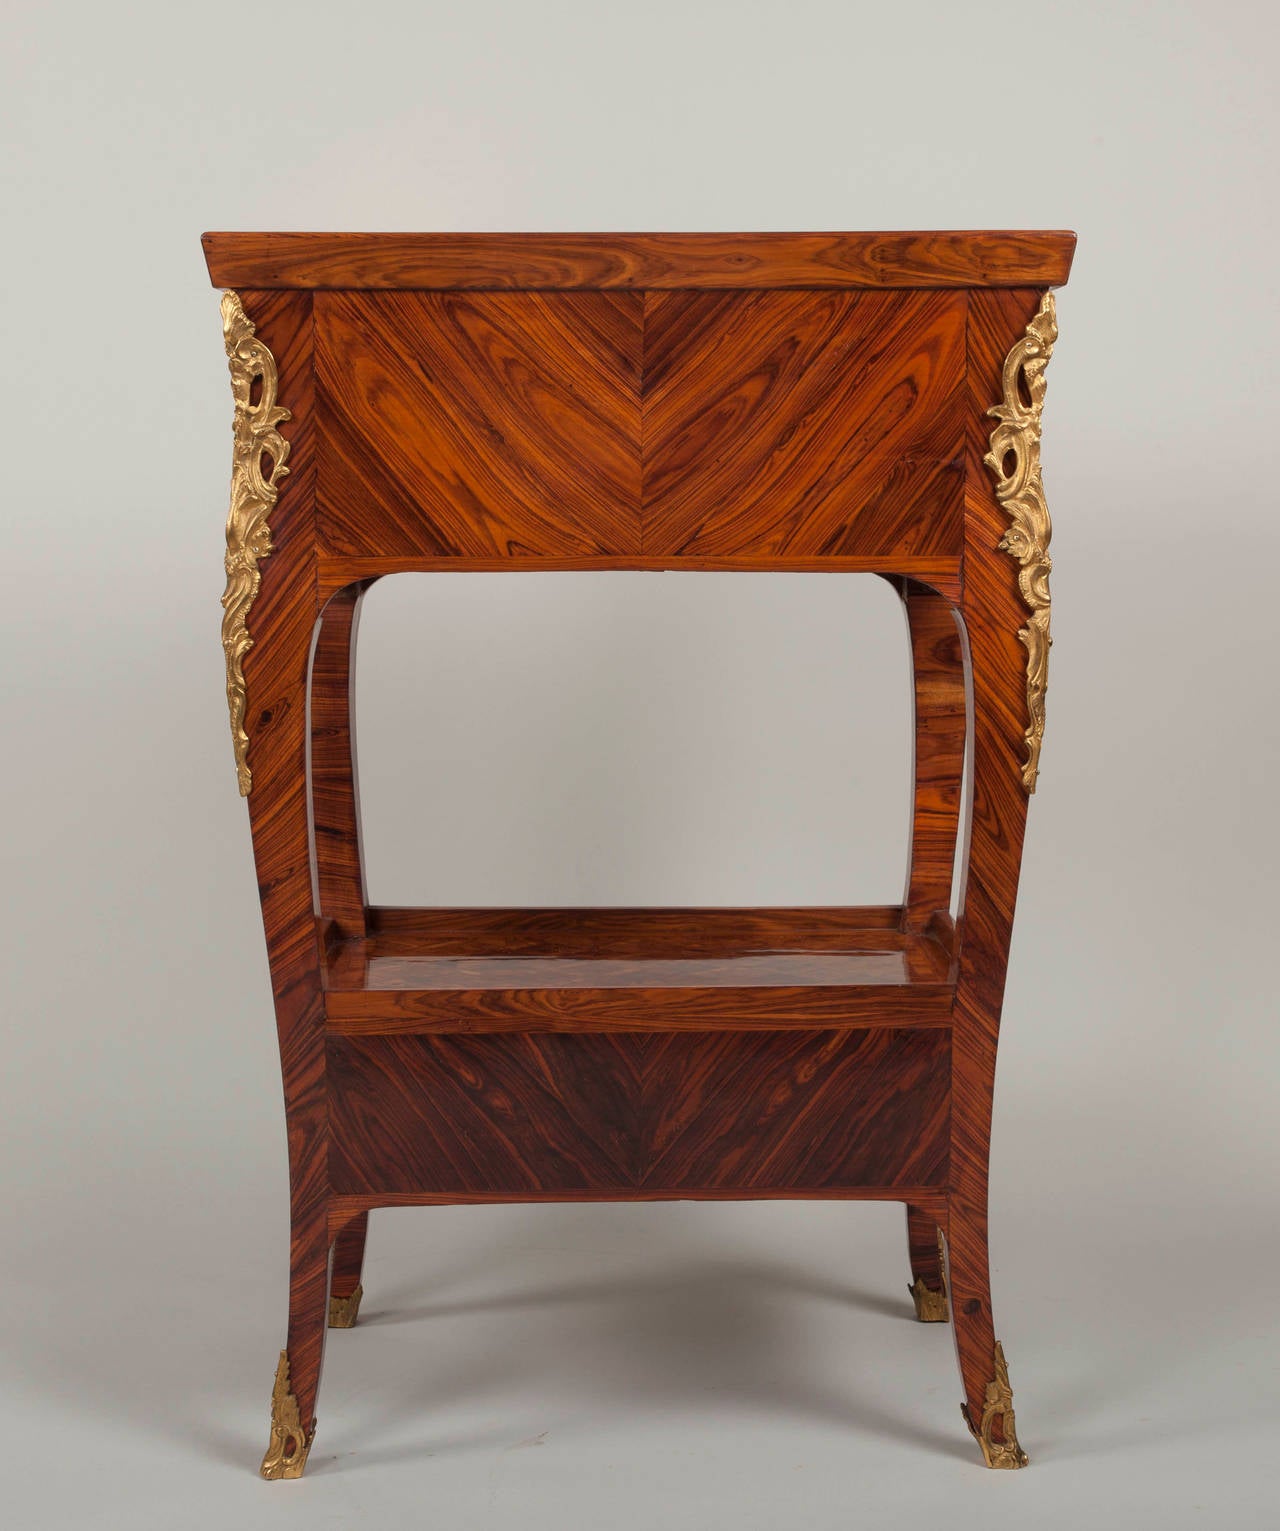 18th Century Louis XV Kingwood Chiffonniere Table Stamped by Criaerd